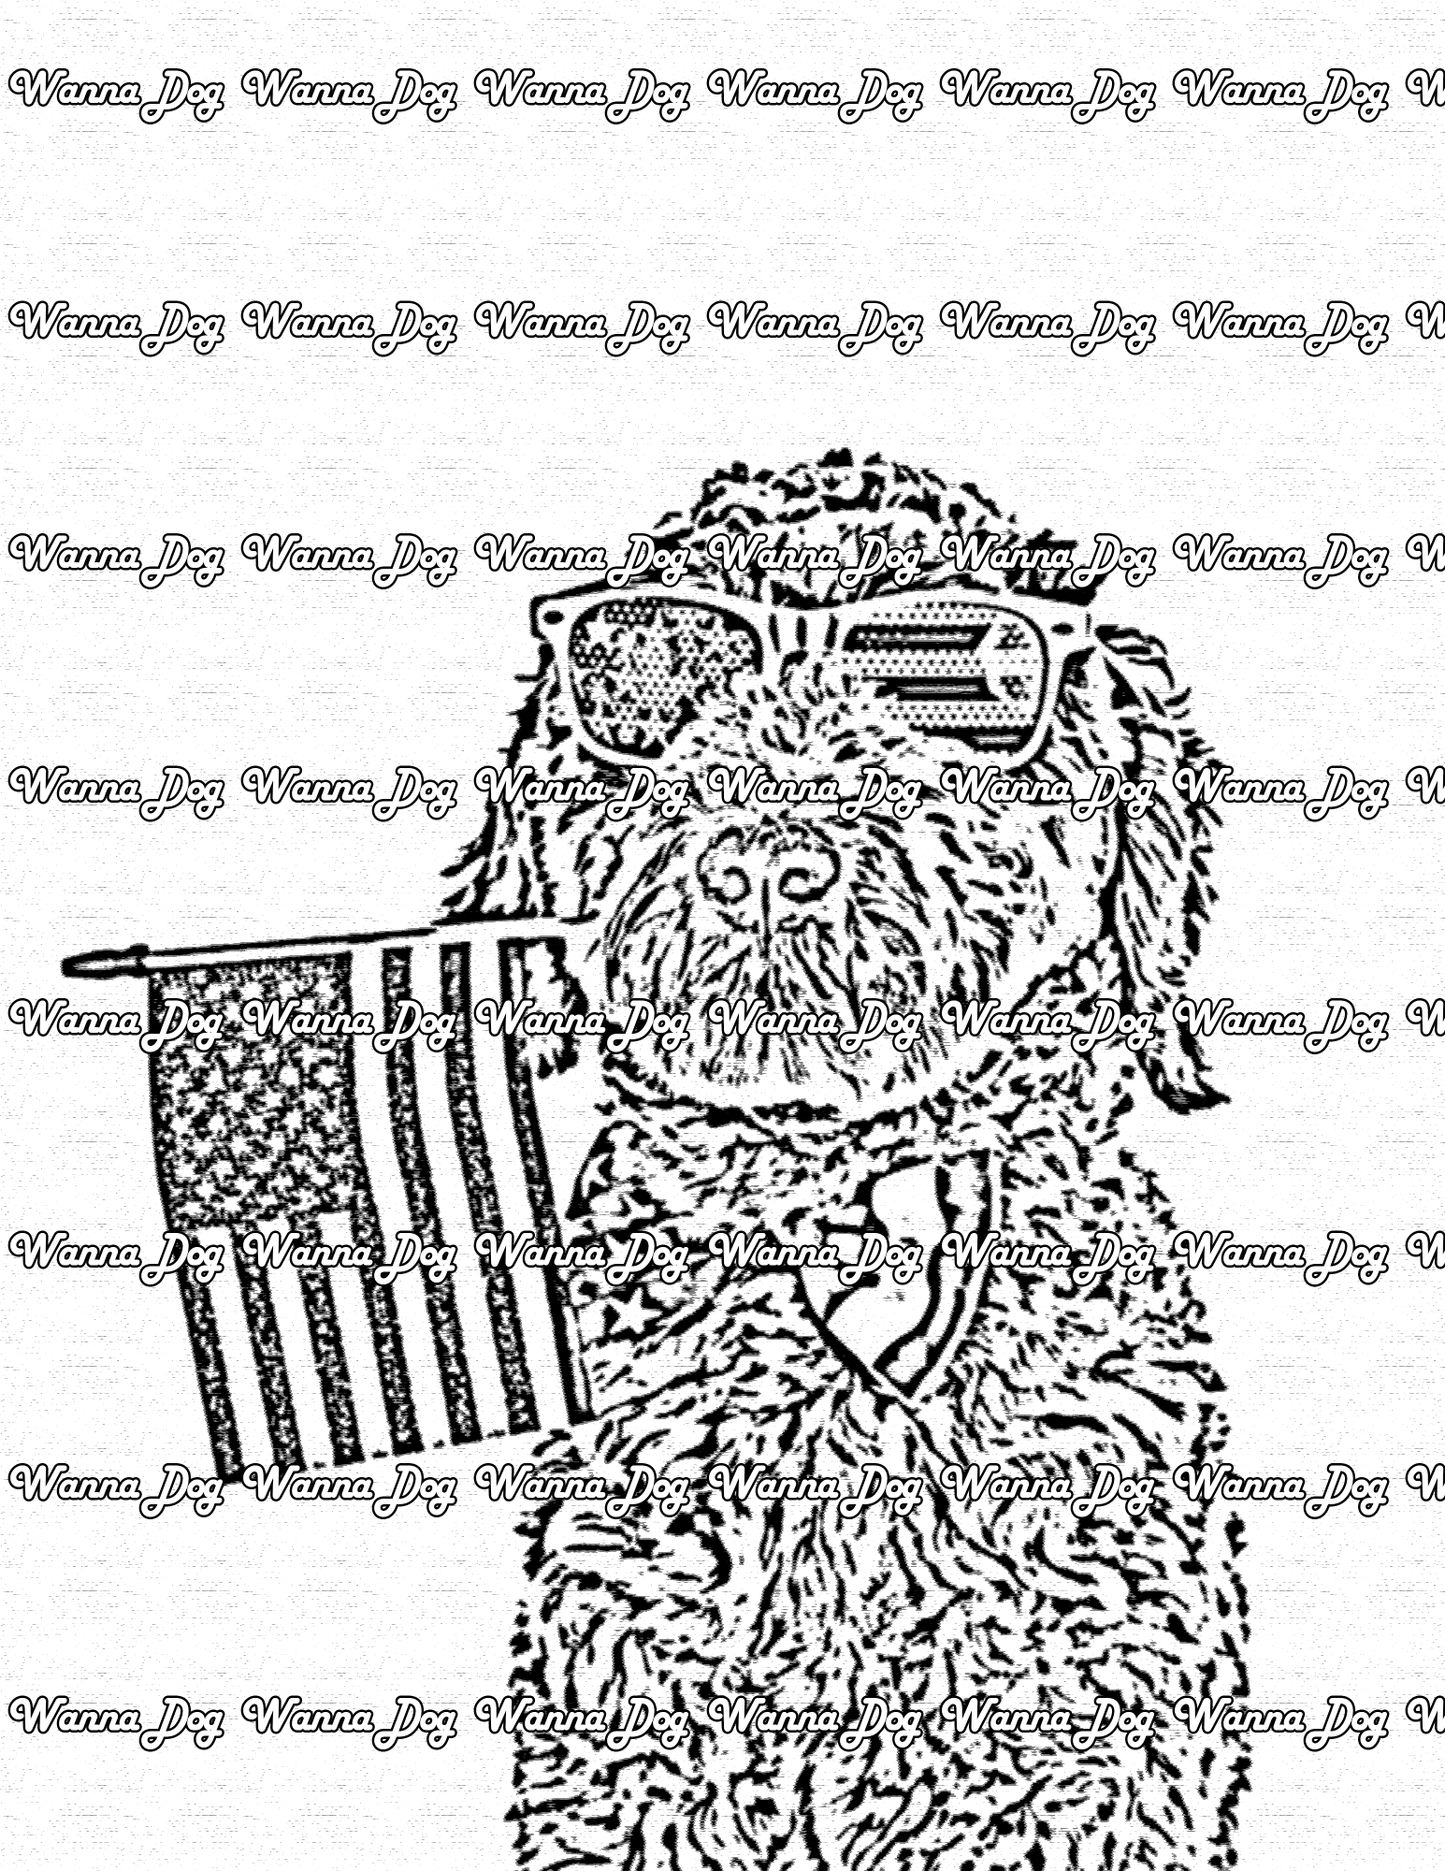 Goldendoodle Coloring Page of a Goldendoodle holding a USA flag, wearing a bowtie, and sunglasses